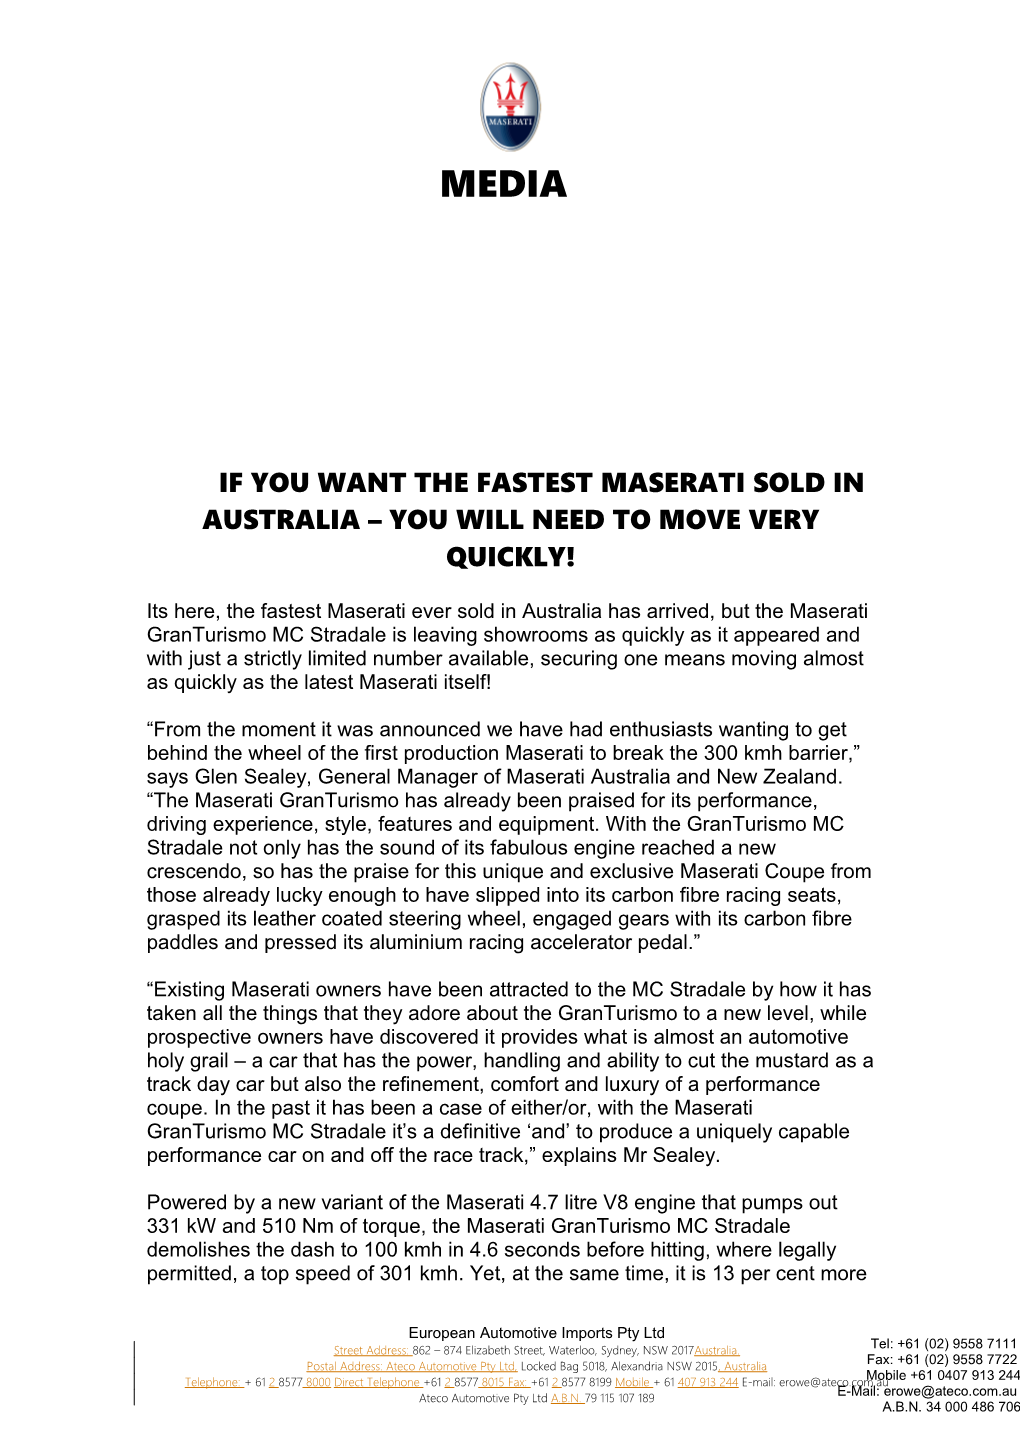 If You Want the Fastest Maserati Sold in AUSTRALIA You Will Need to Move Very Quickly!